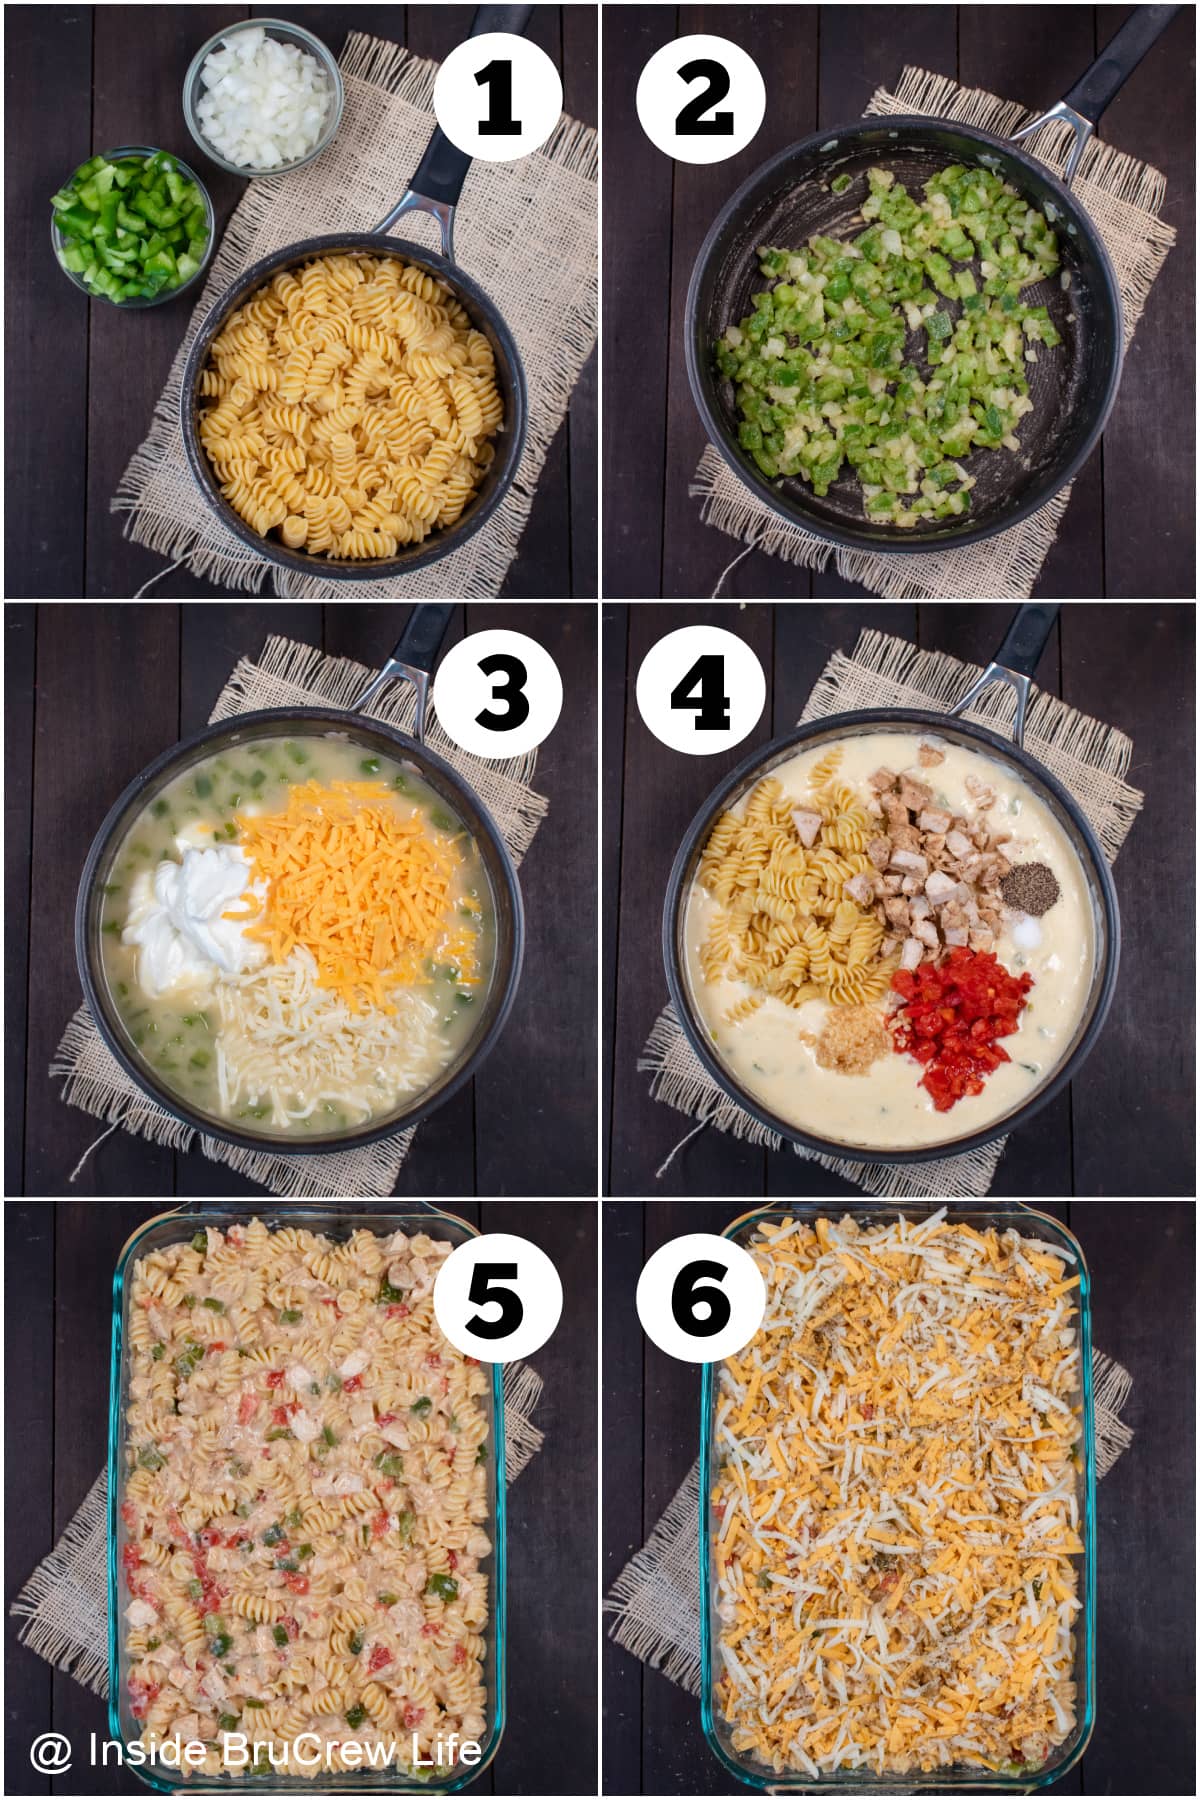 Six pictures collaged together showing the steps for making a cheesy pasta casserole.